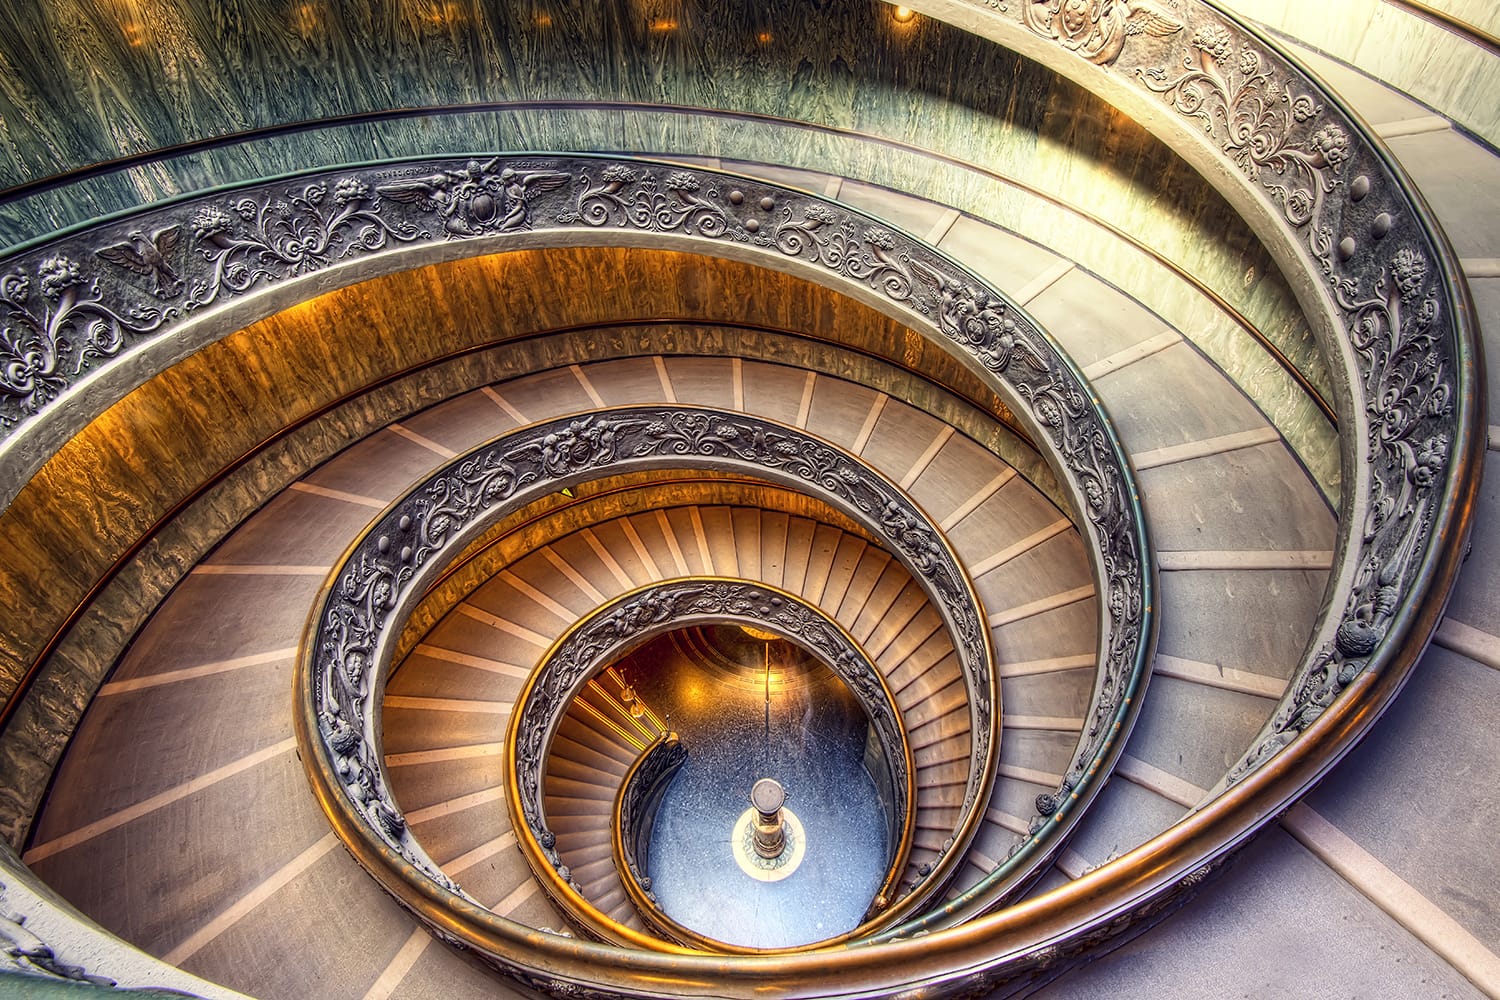 Staircase at the Vatican Museum in Rome, Italy